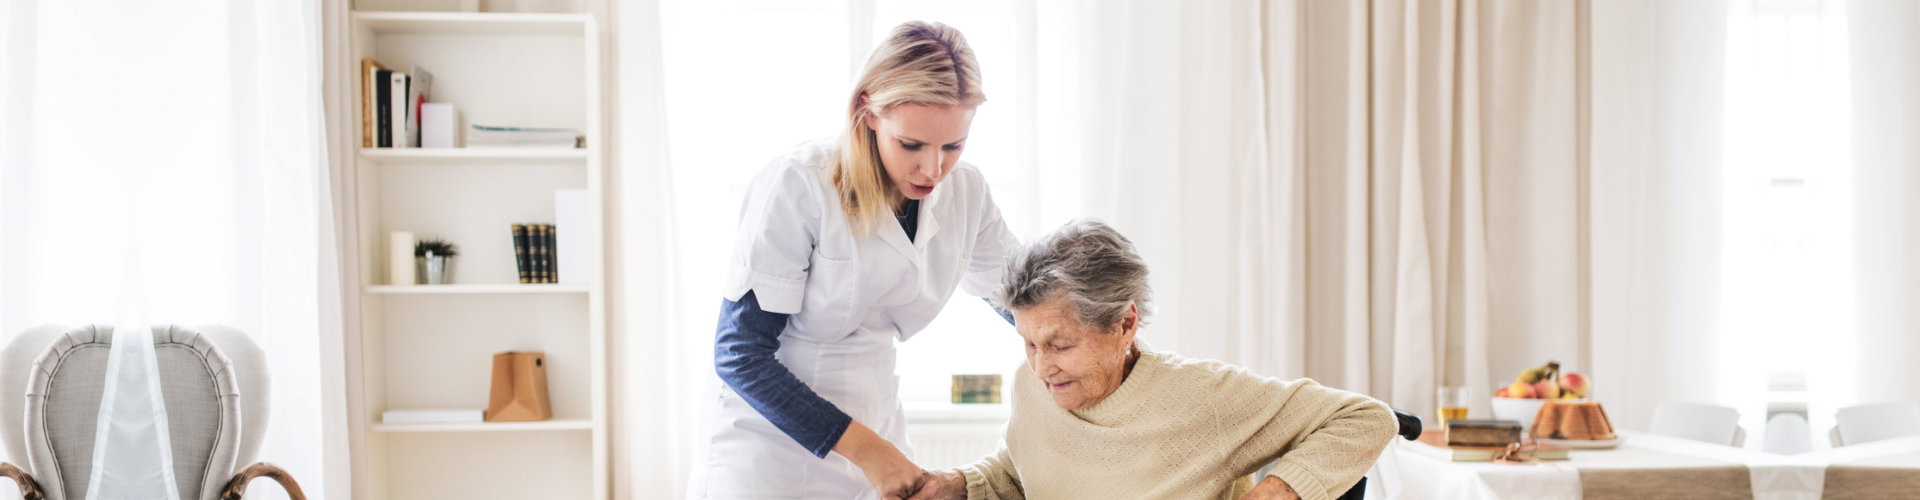 caregiver helping a senior woman to stand